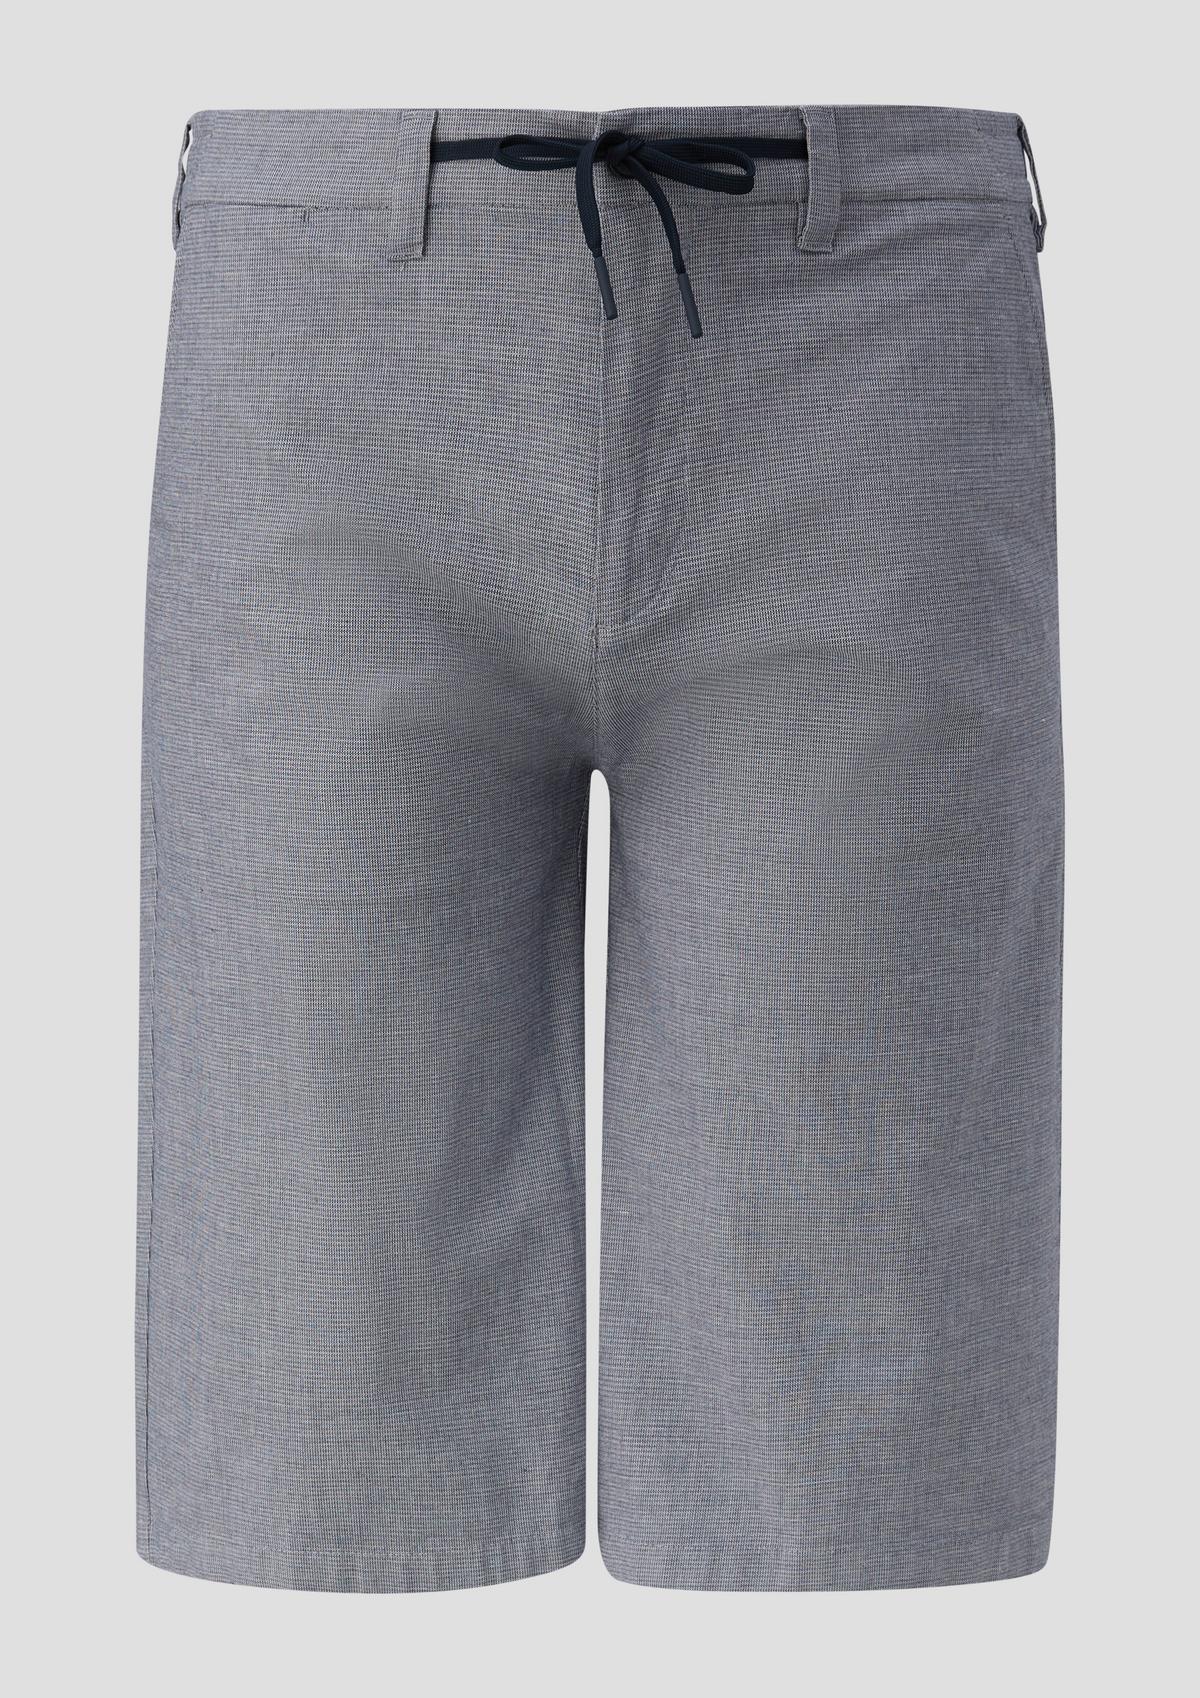 Relaxed fit: Stretch cotton Bermudas with a drawstring